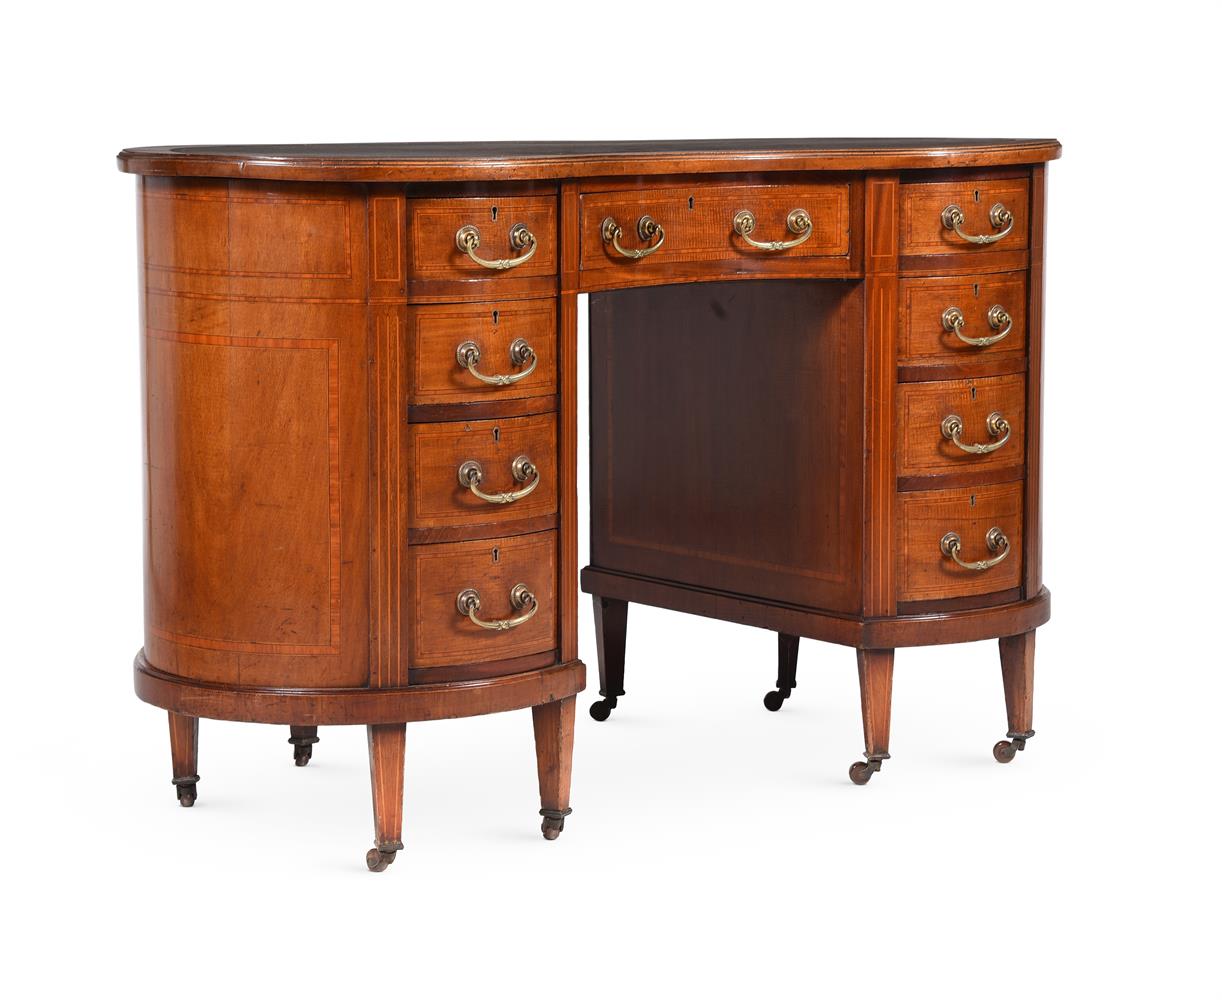 Y AN EDWARDIAN MAHOGANY AND SATINWOOD CROSSBANDED KIDNEY SHAPED DESK, ATTRIBUTED TO EDWARDS & ROBERT - Image 2 of 5